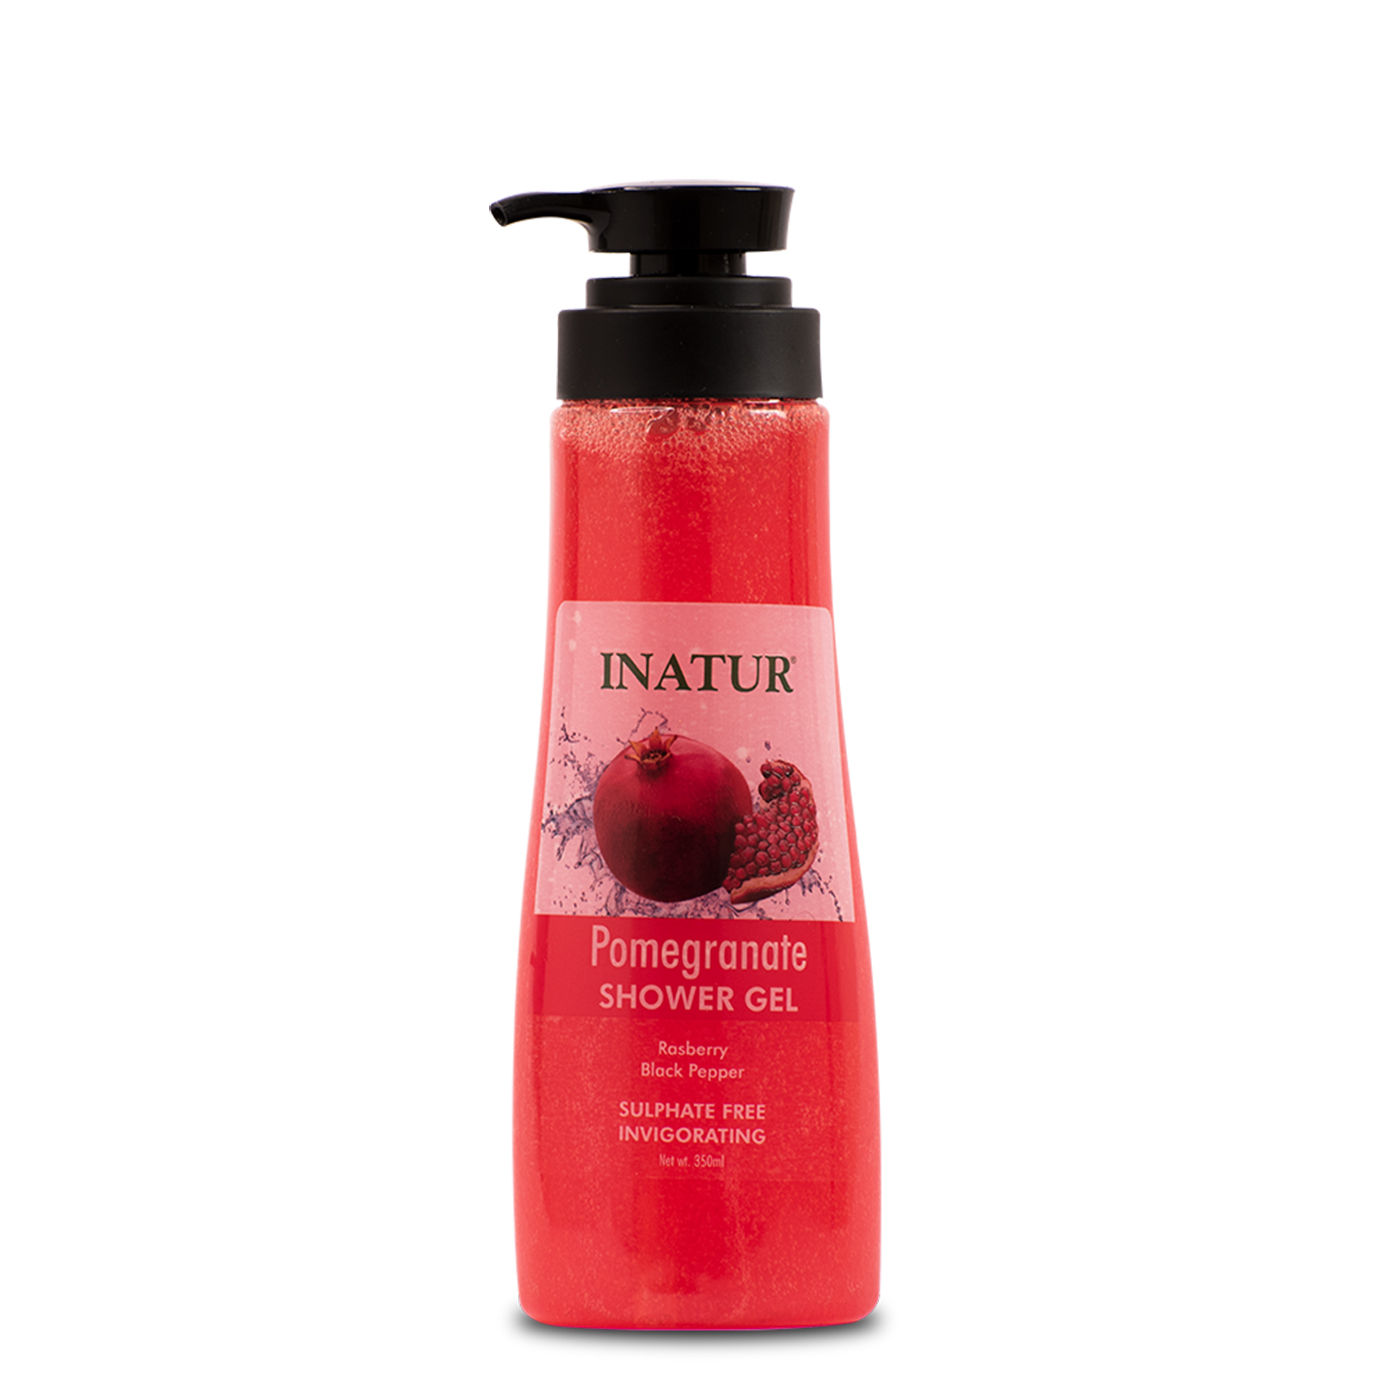 Inatur Pomegranate Shower Gel With Rasberry & Black Pepper (Sulphate Free)